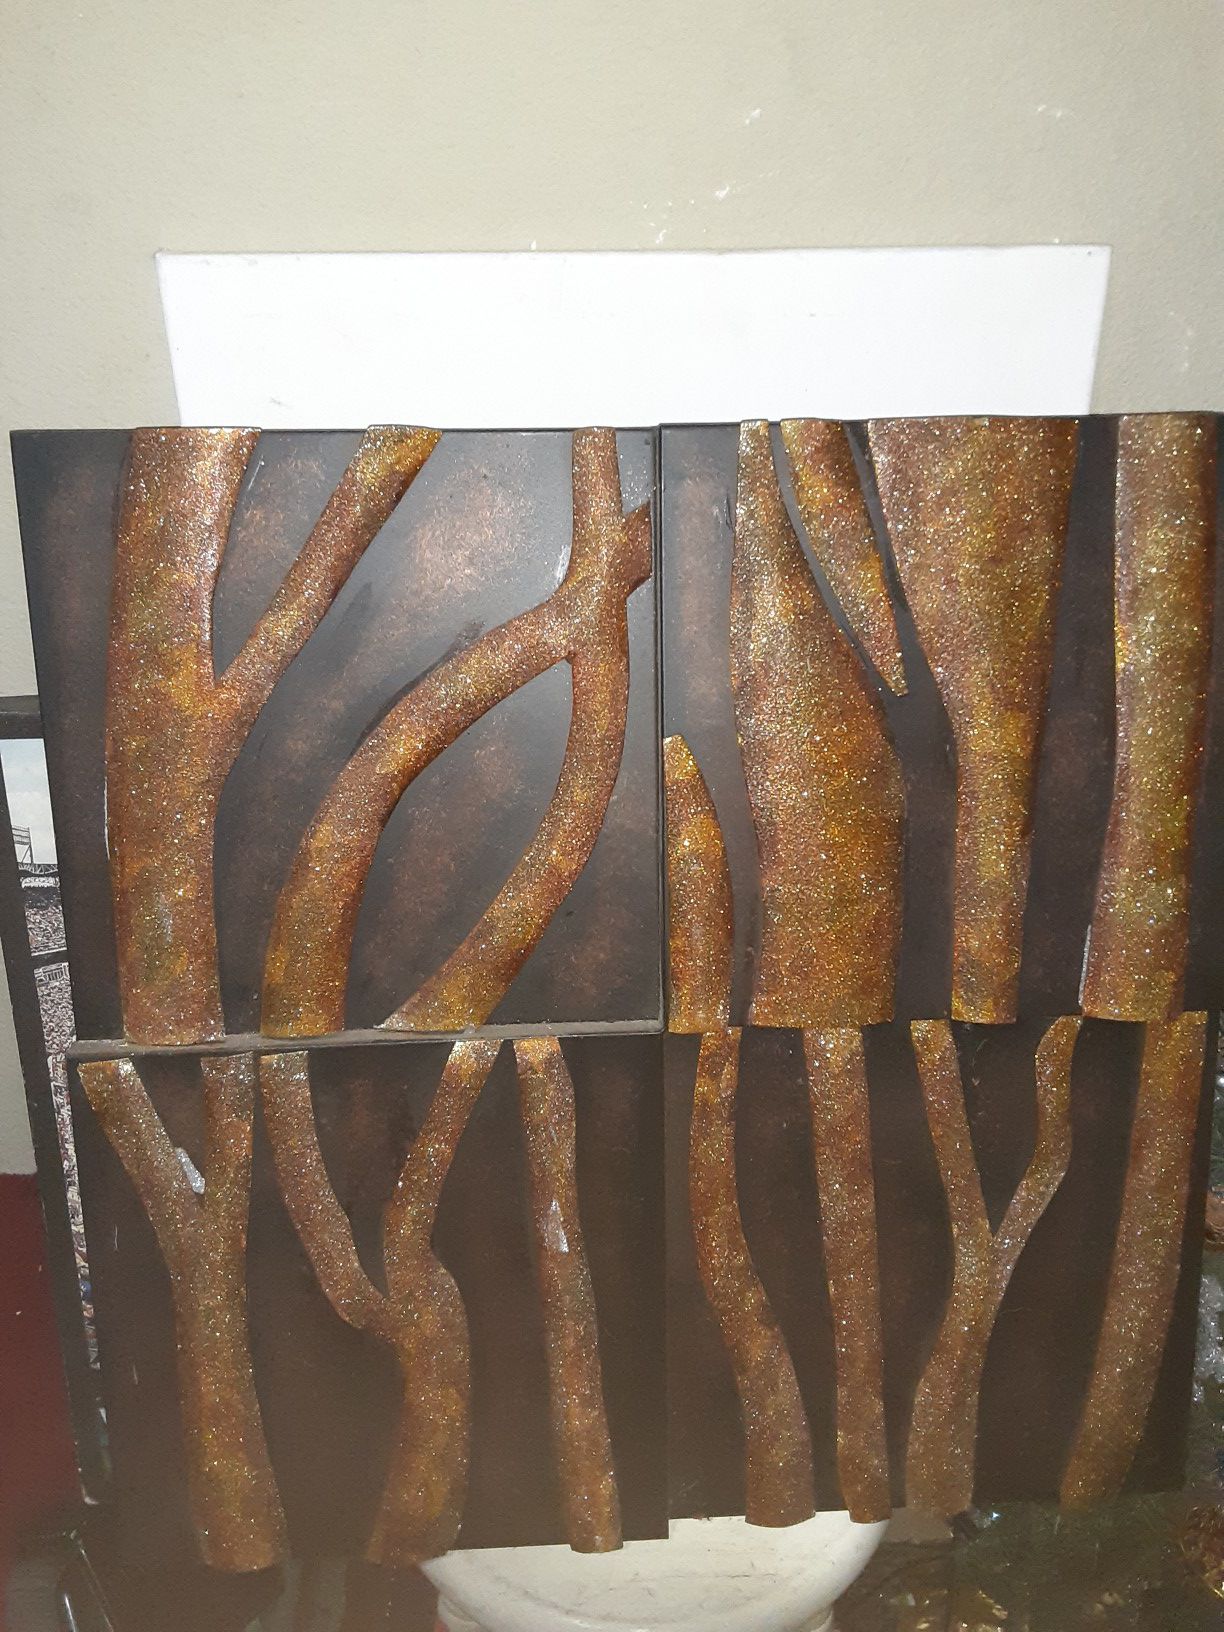 Glittery Tree Bark Wall Decor $20.00 cash only (serious buyers)